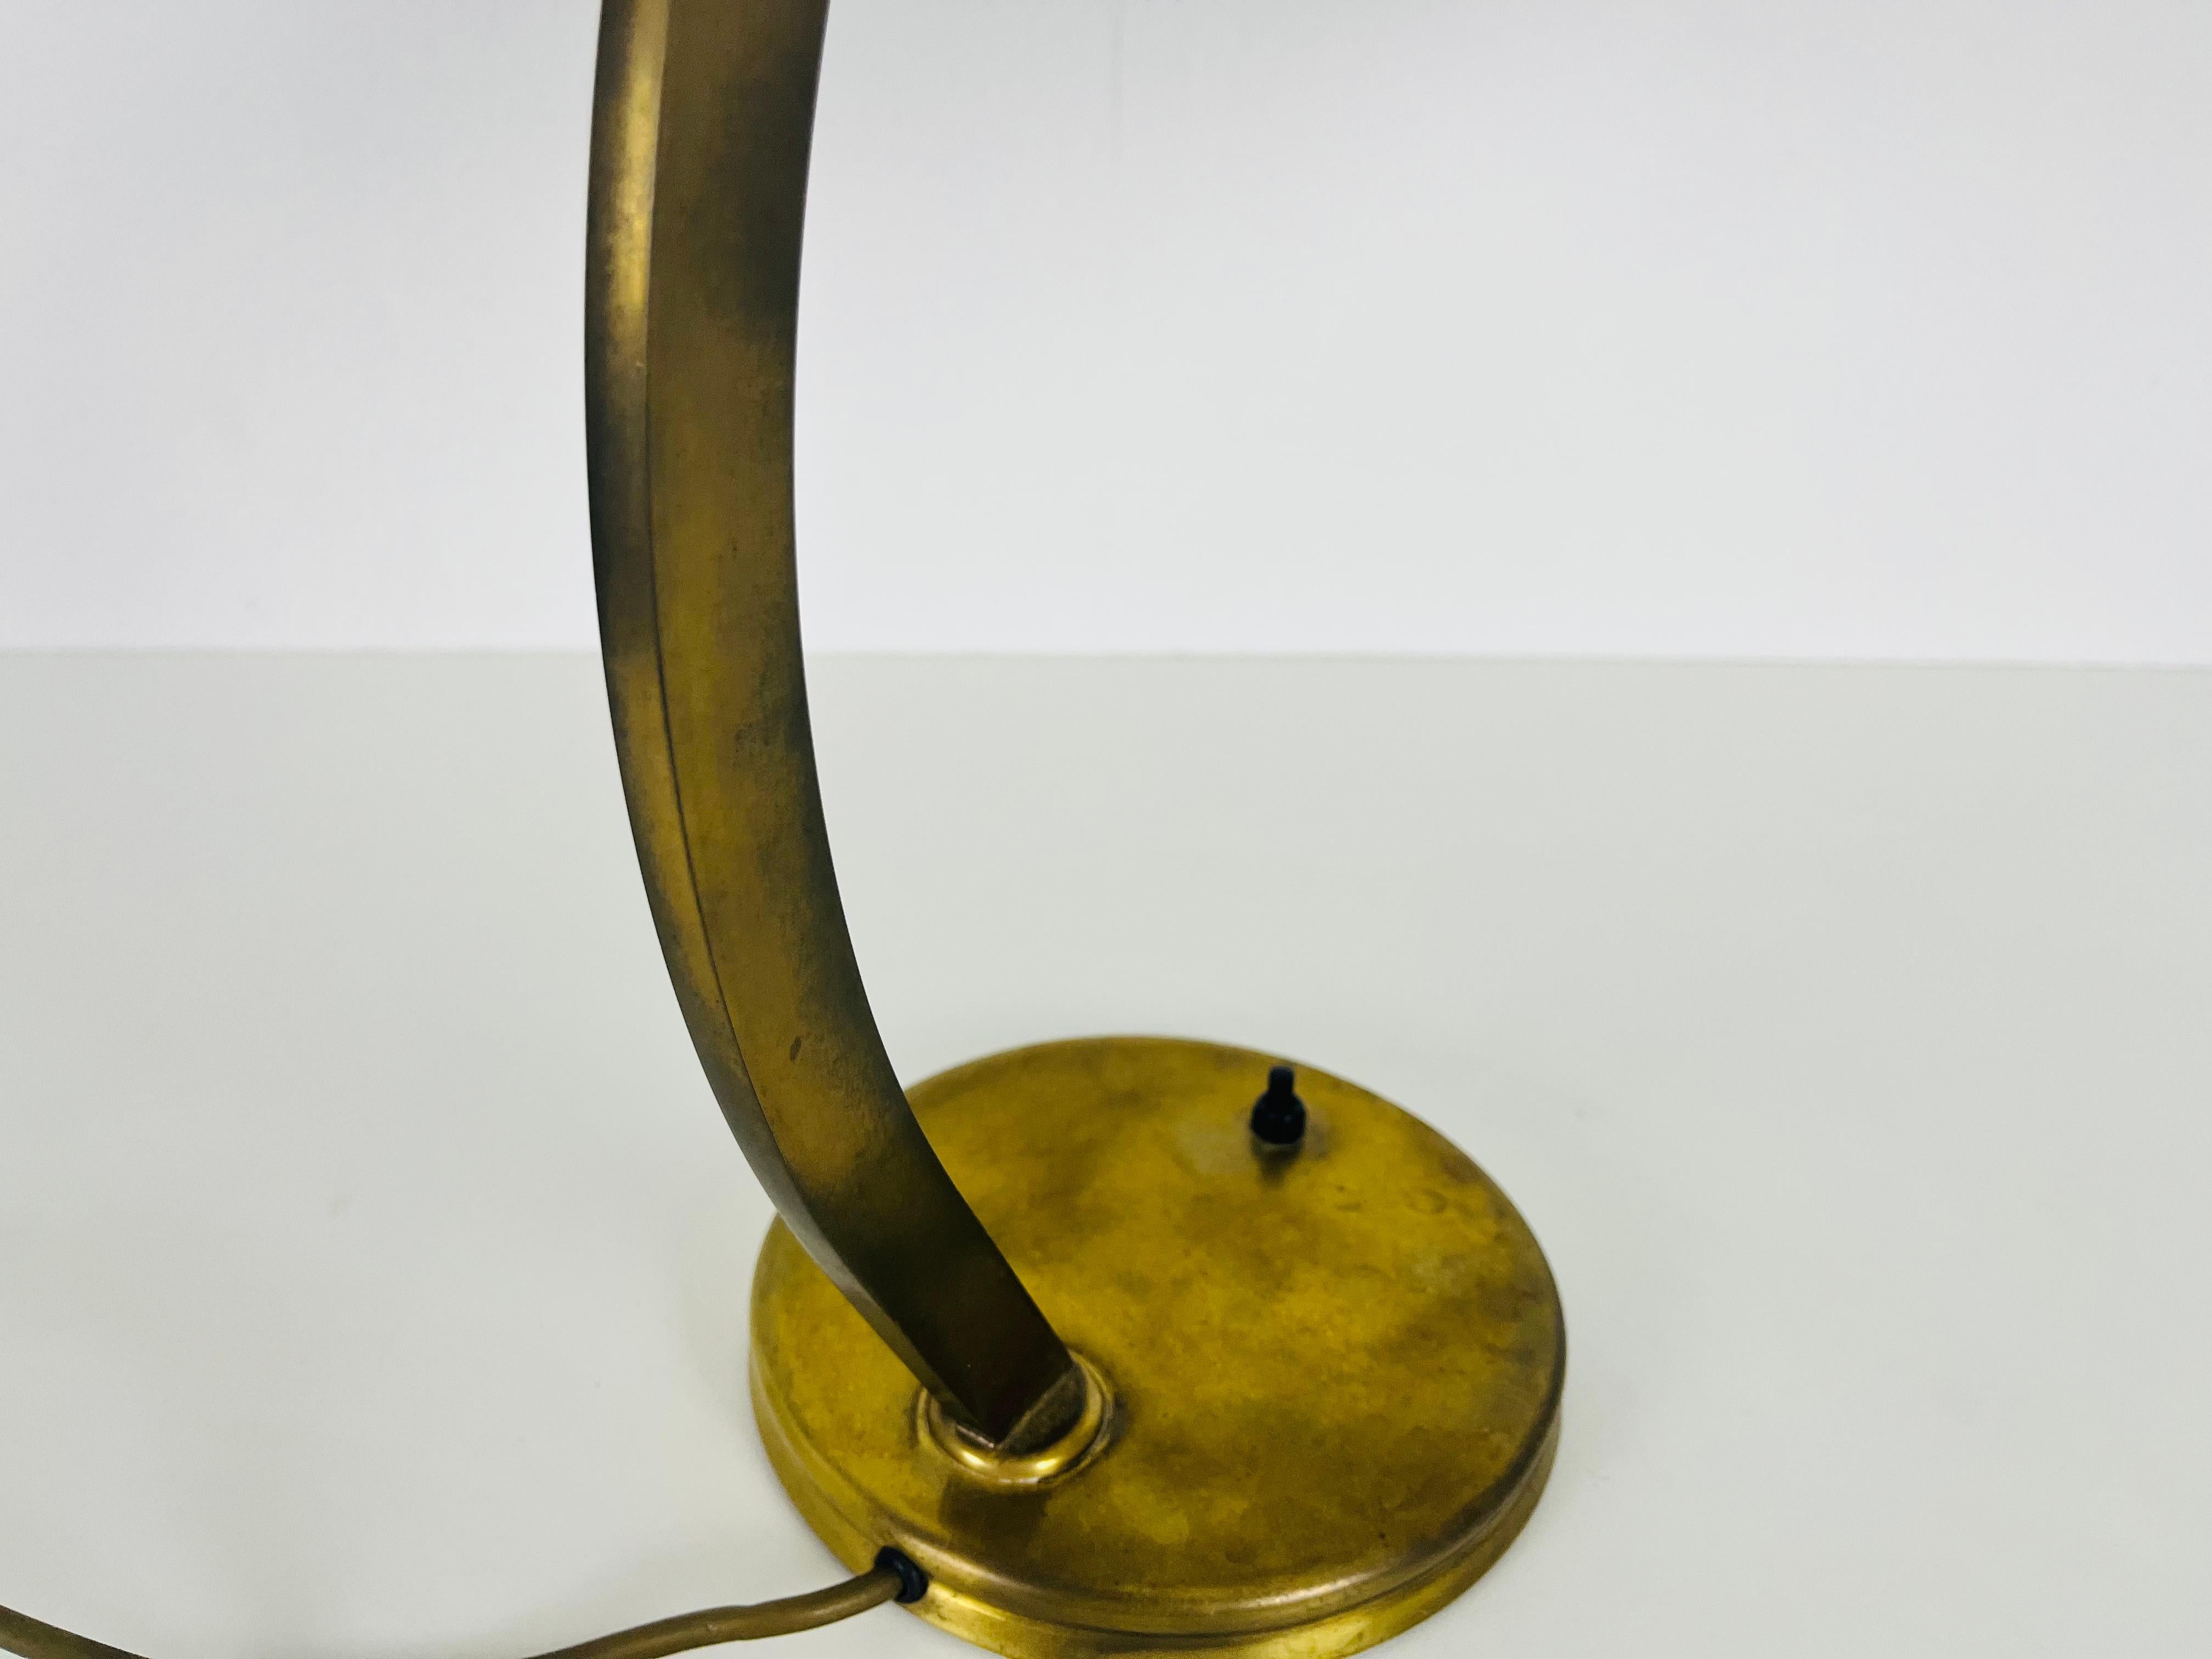 Hillebrand Midcentury Full Brass Table Lamp, 1960s, Germany For Sale 5